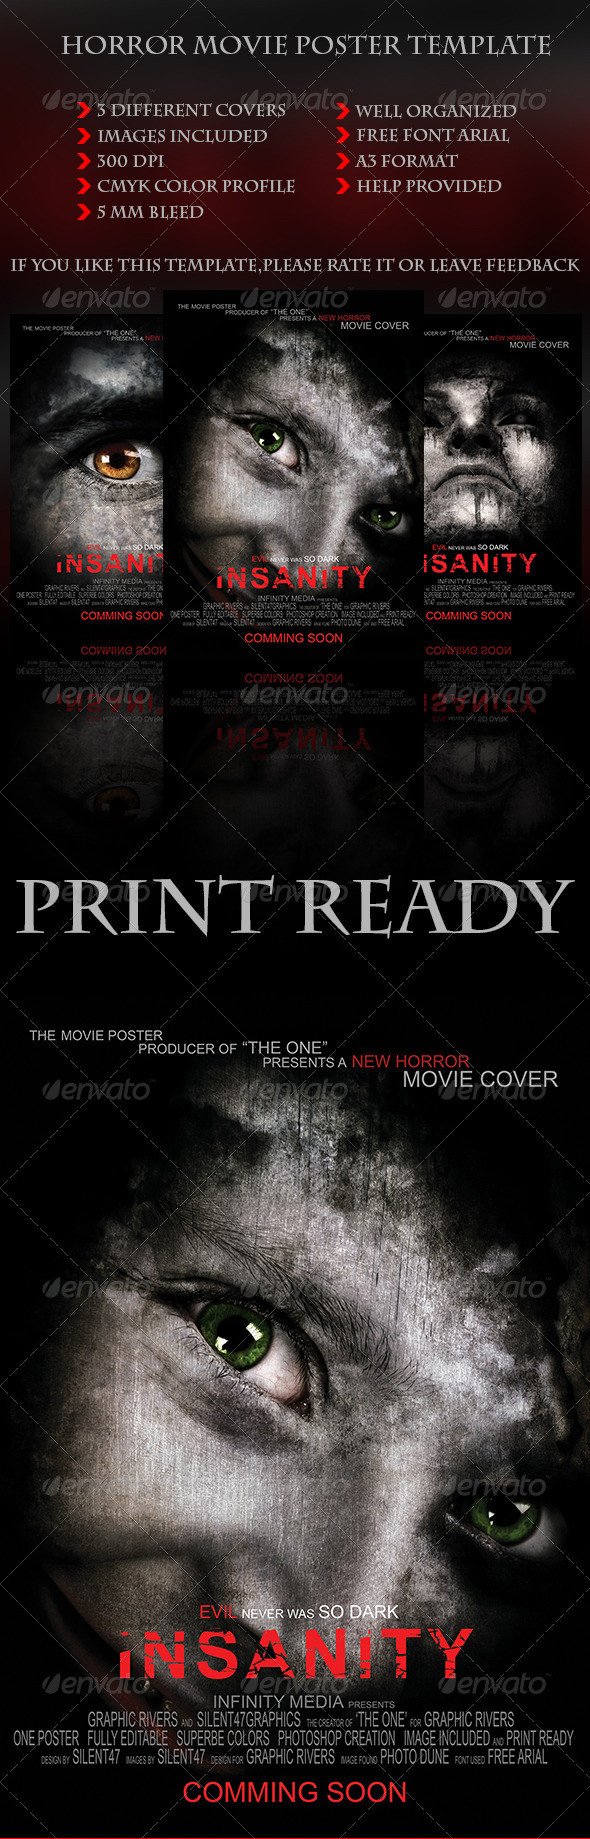 Movie Poster Template Psd Horror Movie Poster Template by Silentgraphics